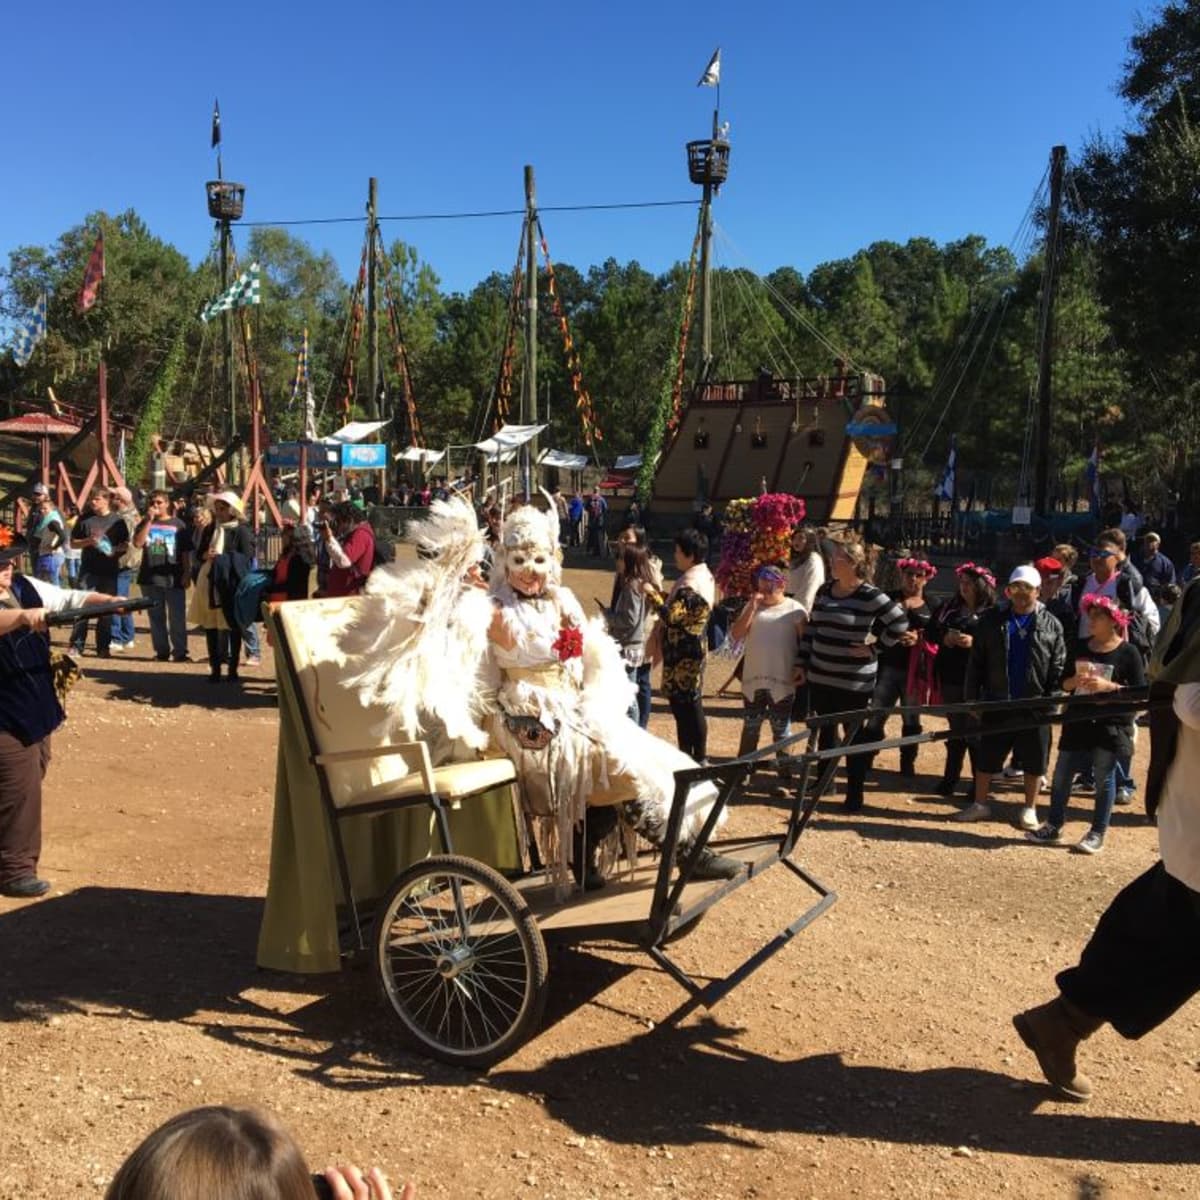 How To Visit The Ohio Renaissance Festival With Kids